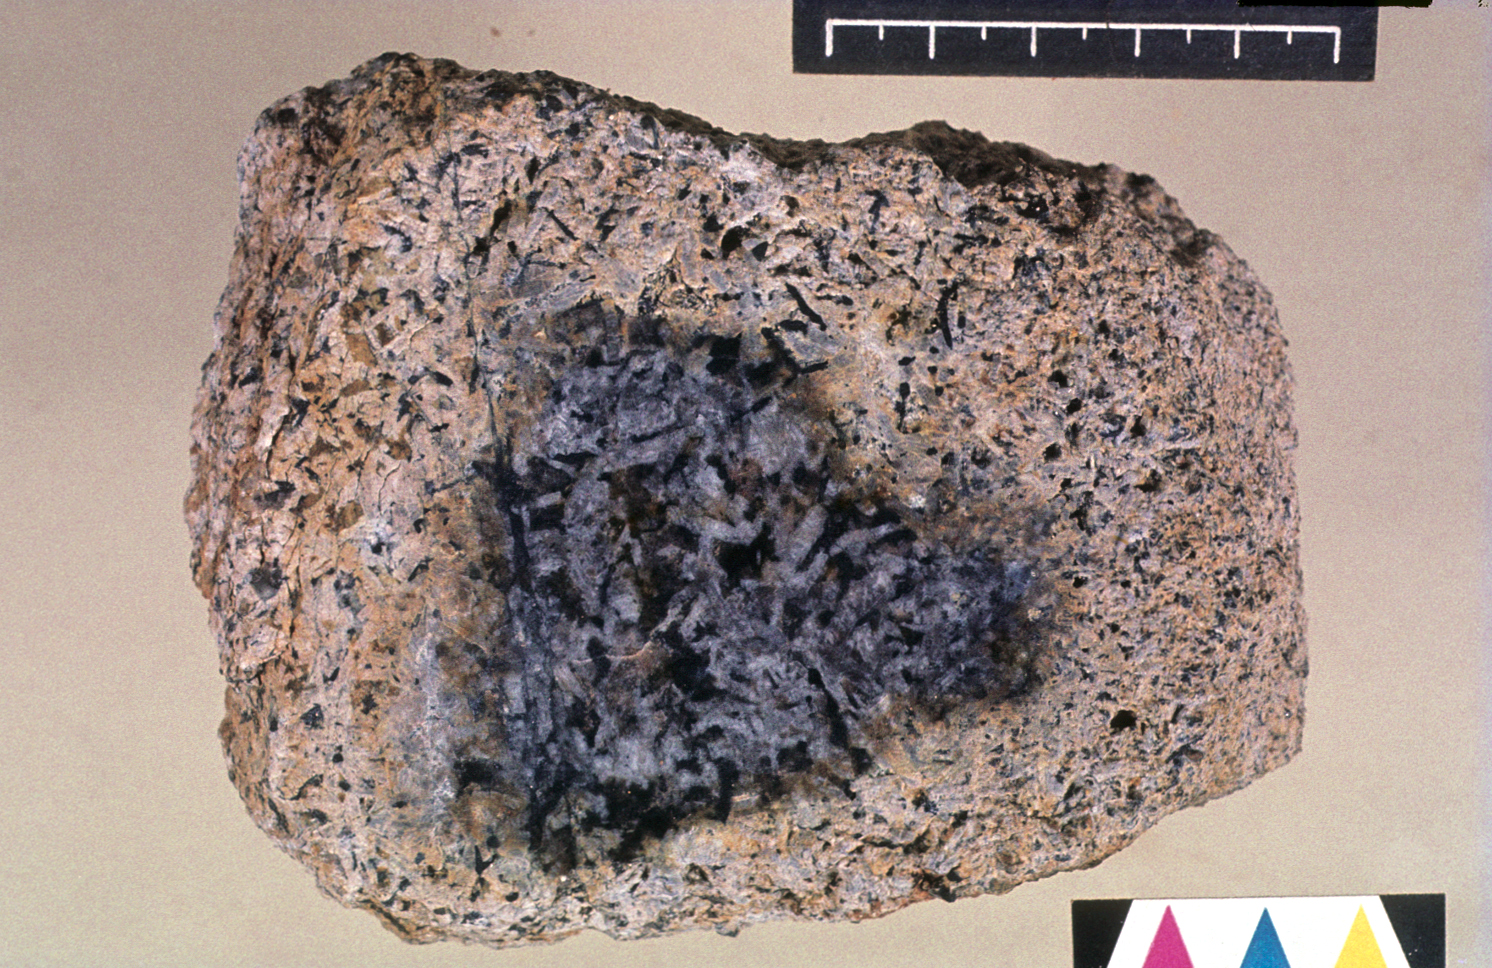 Chunk of heavily weathered tan and porous rock that has unweathered elongated gray and black crystals in the center.